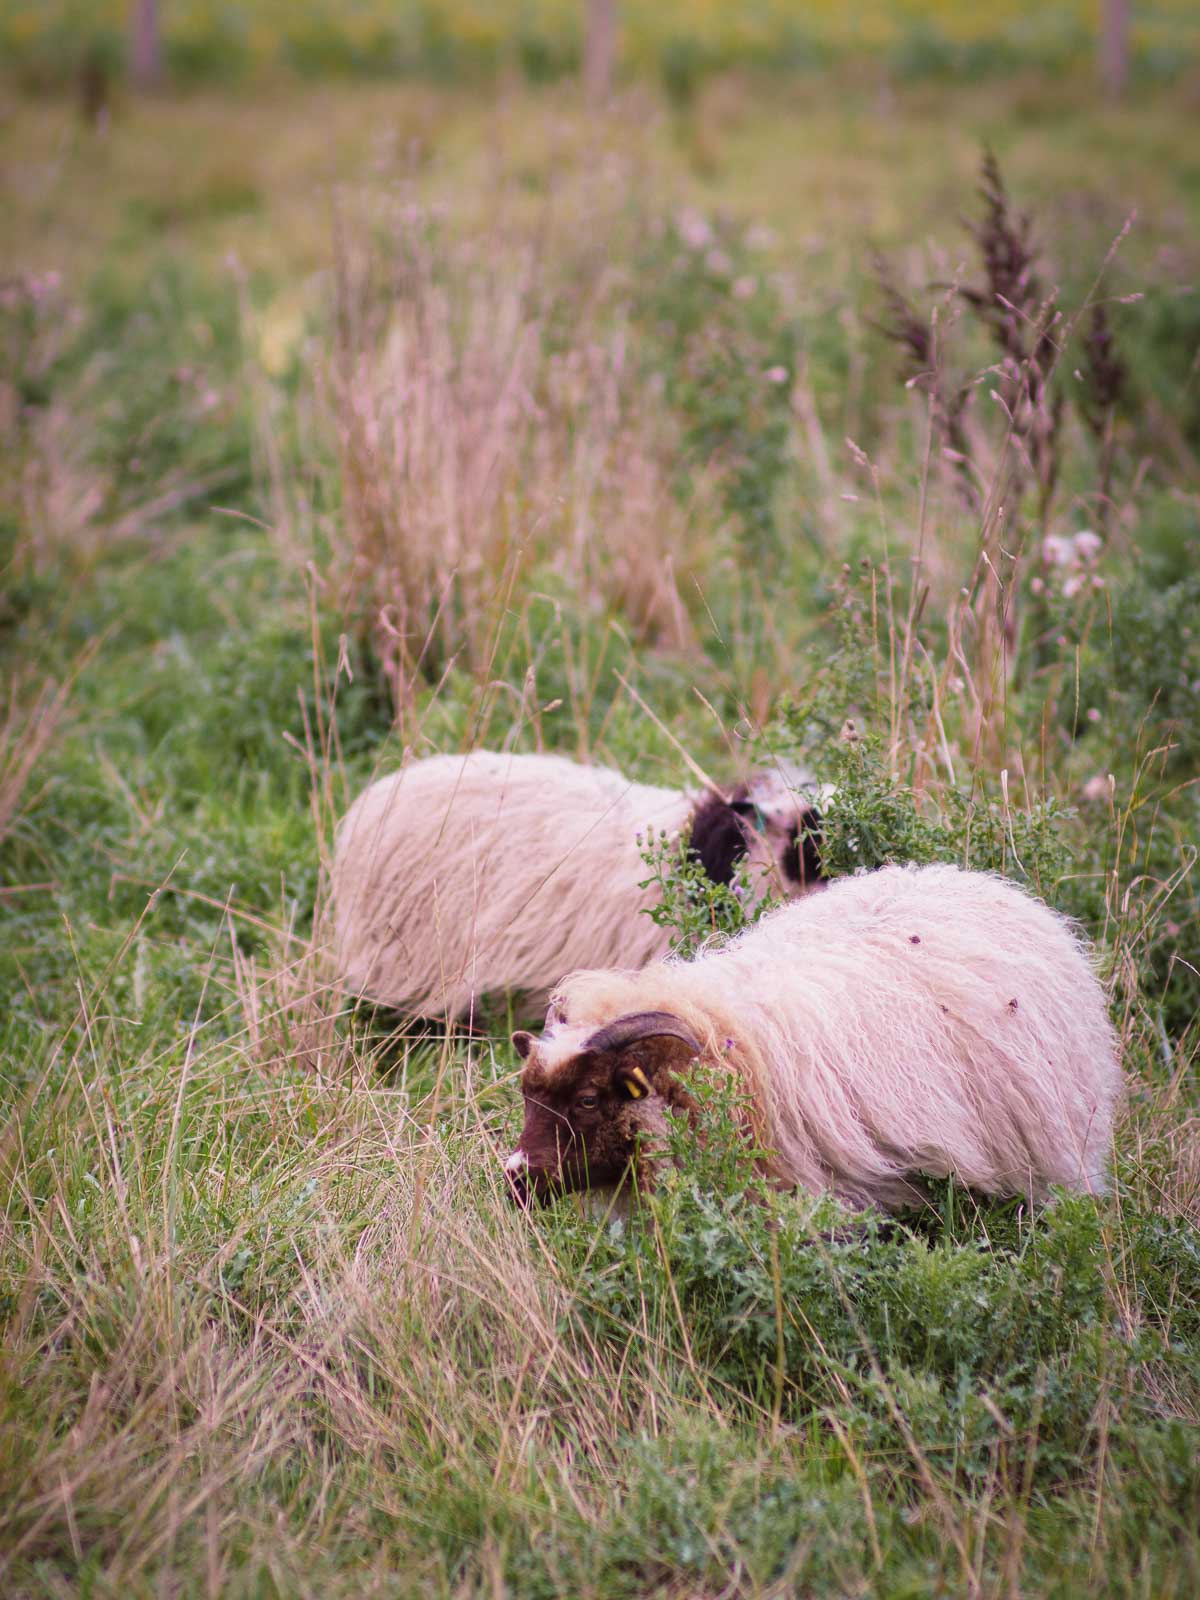 Two Icelandic ewes with long, white wool eating a very tall pasture of mixed grasses and legumes.